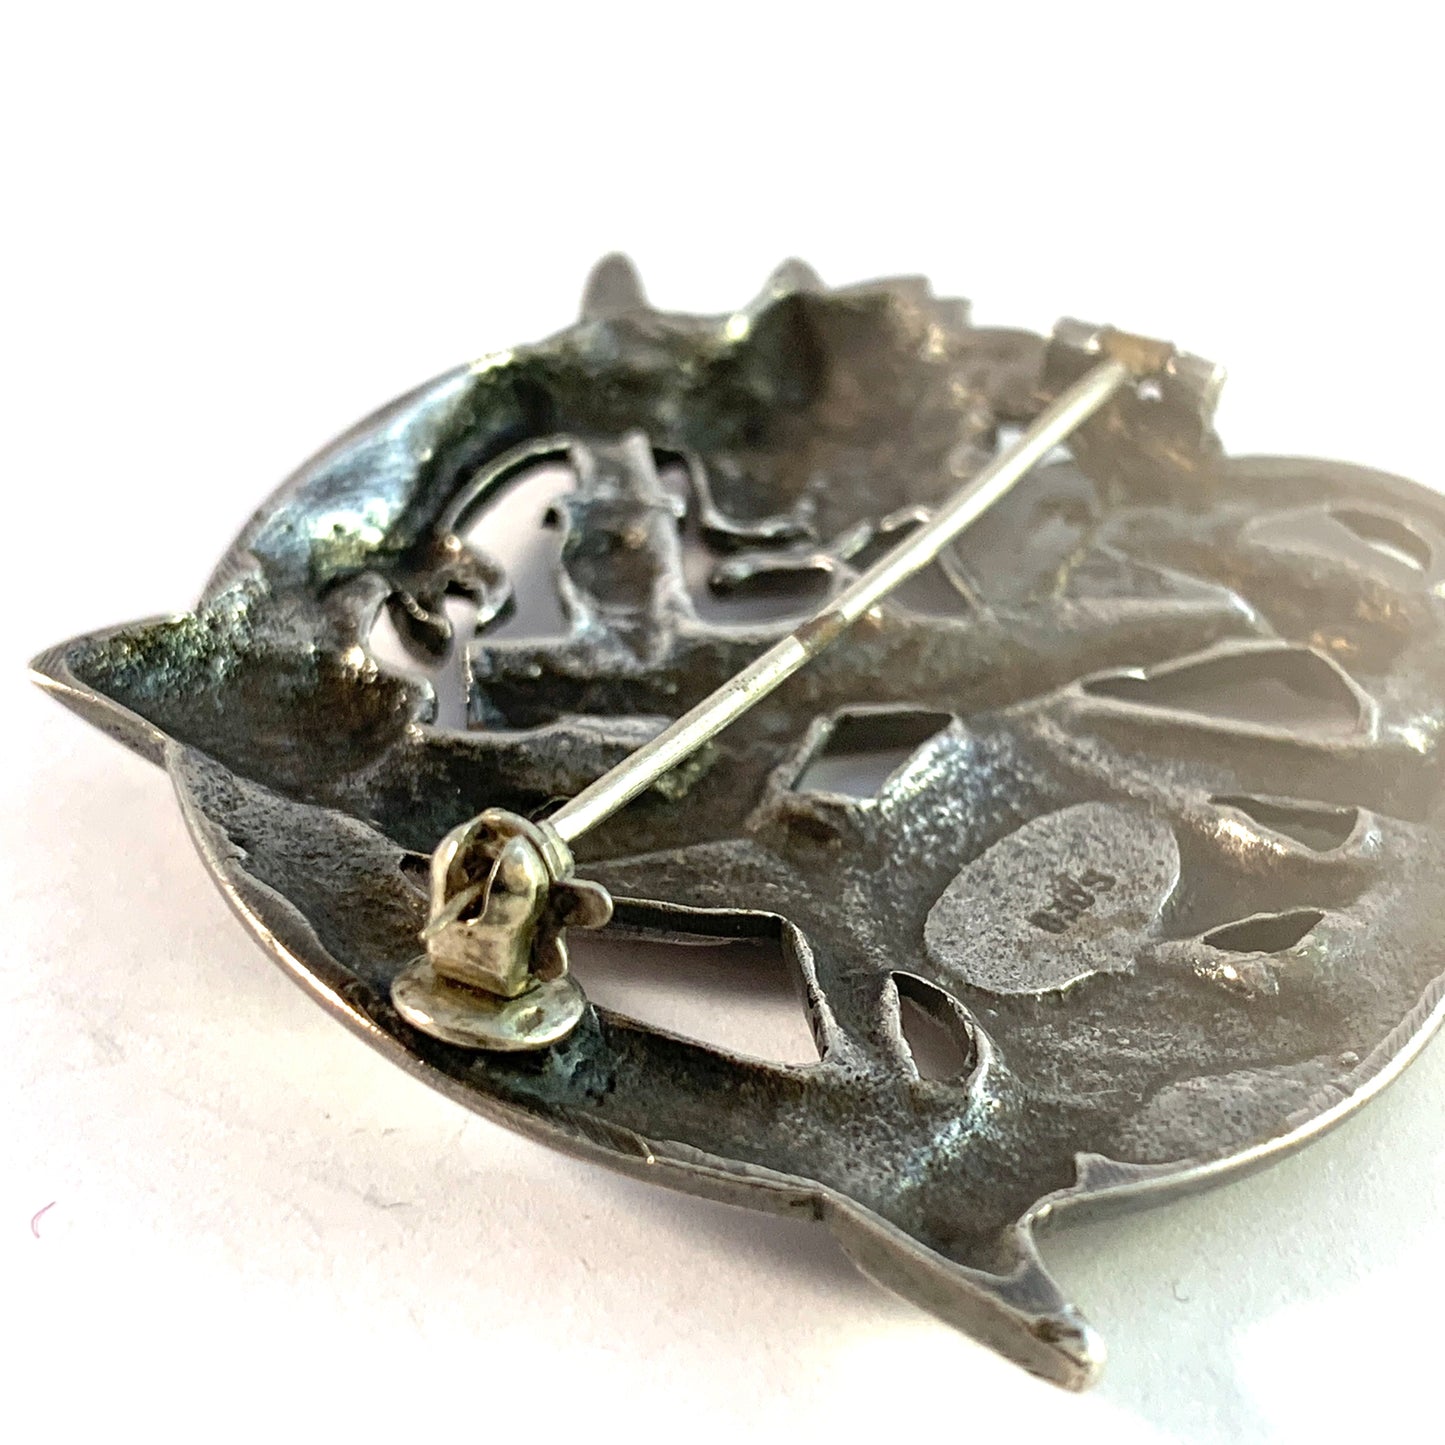 Norway Early 1900s. Large Solid 830 Silver Dragestil Dragon Style Brooch.